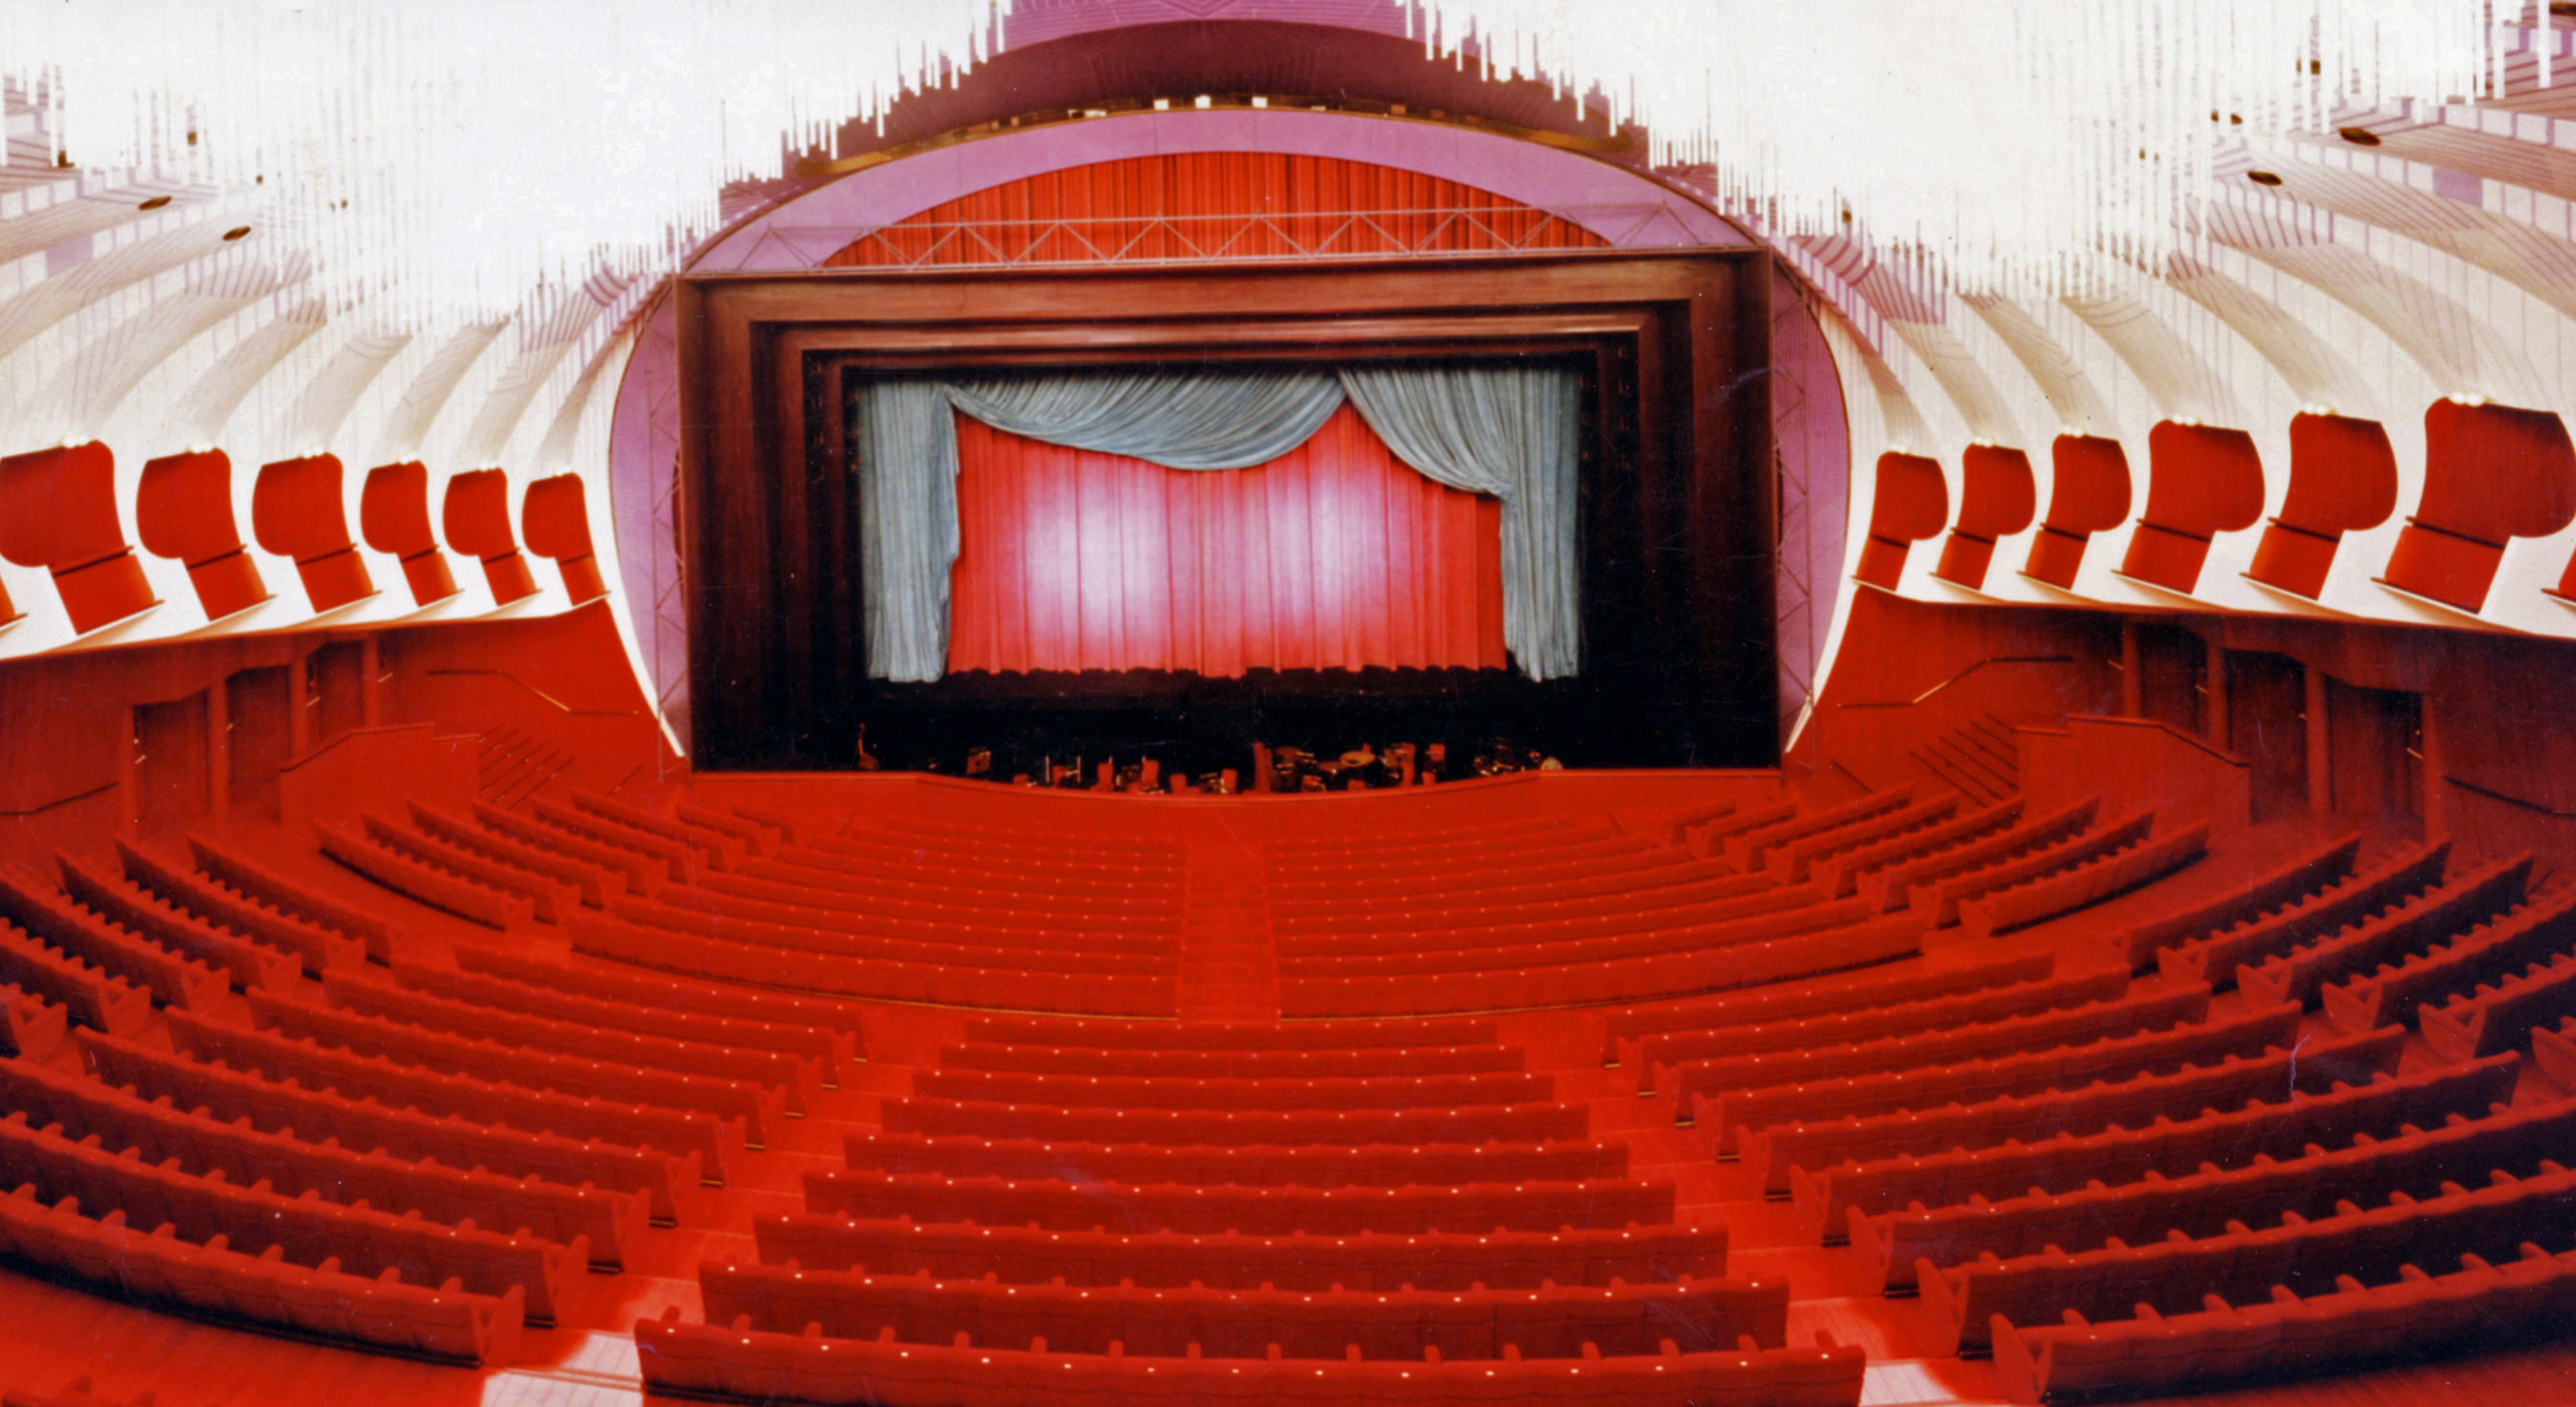 The proscenium of the Teatro Regio after the acoustical restoration of 1996